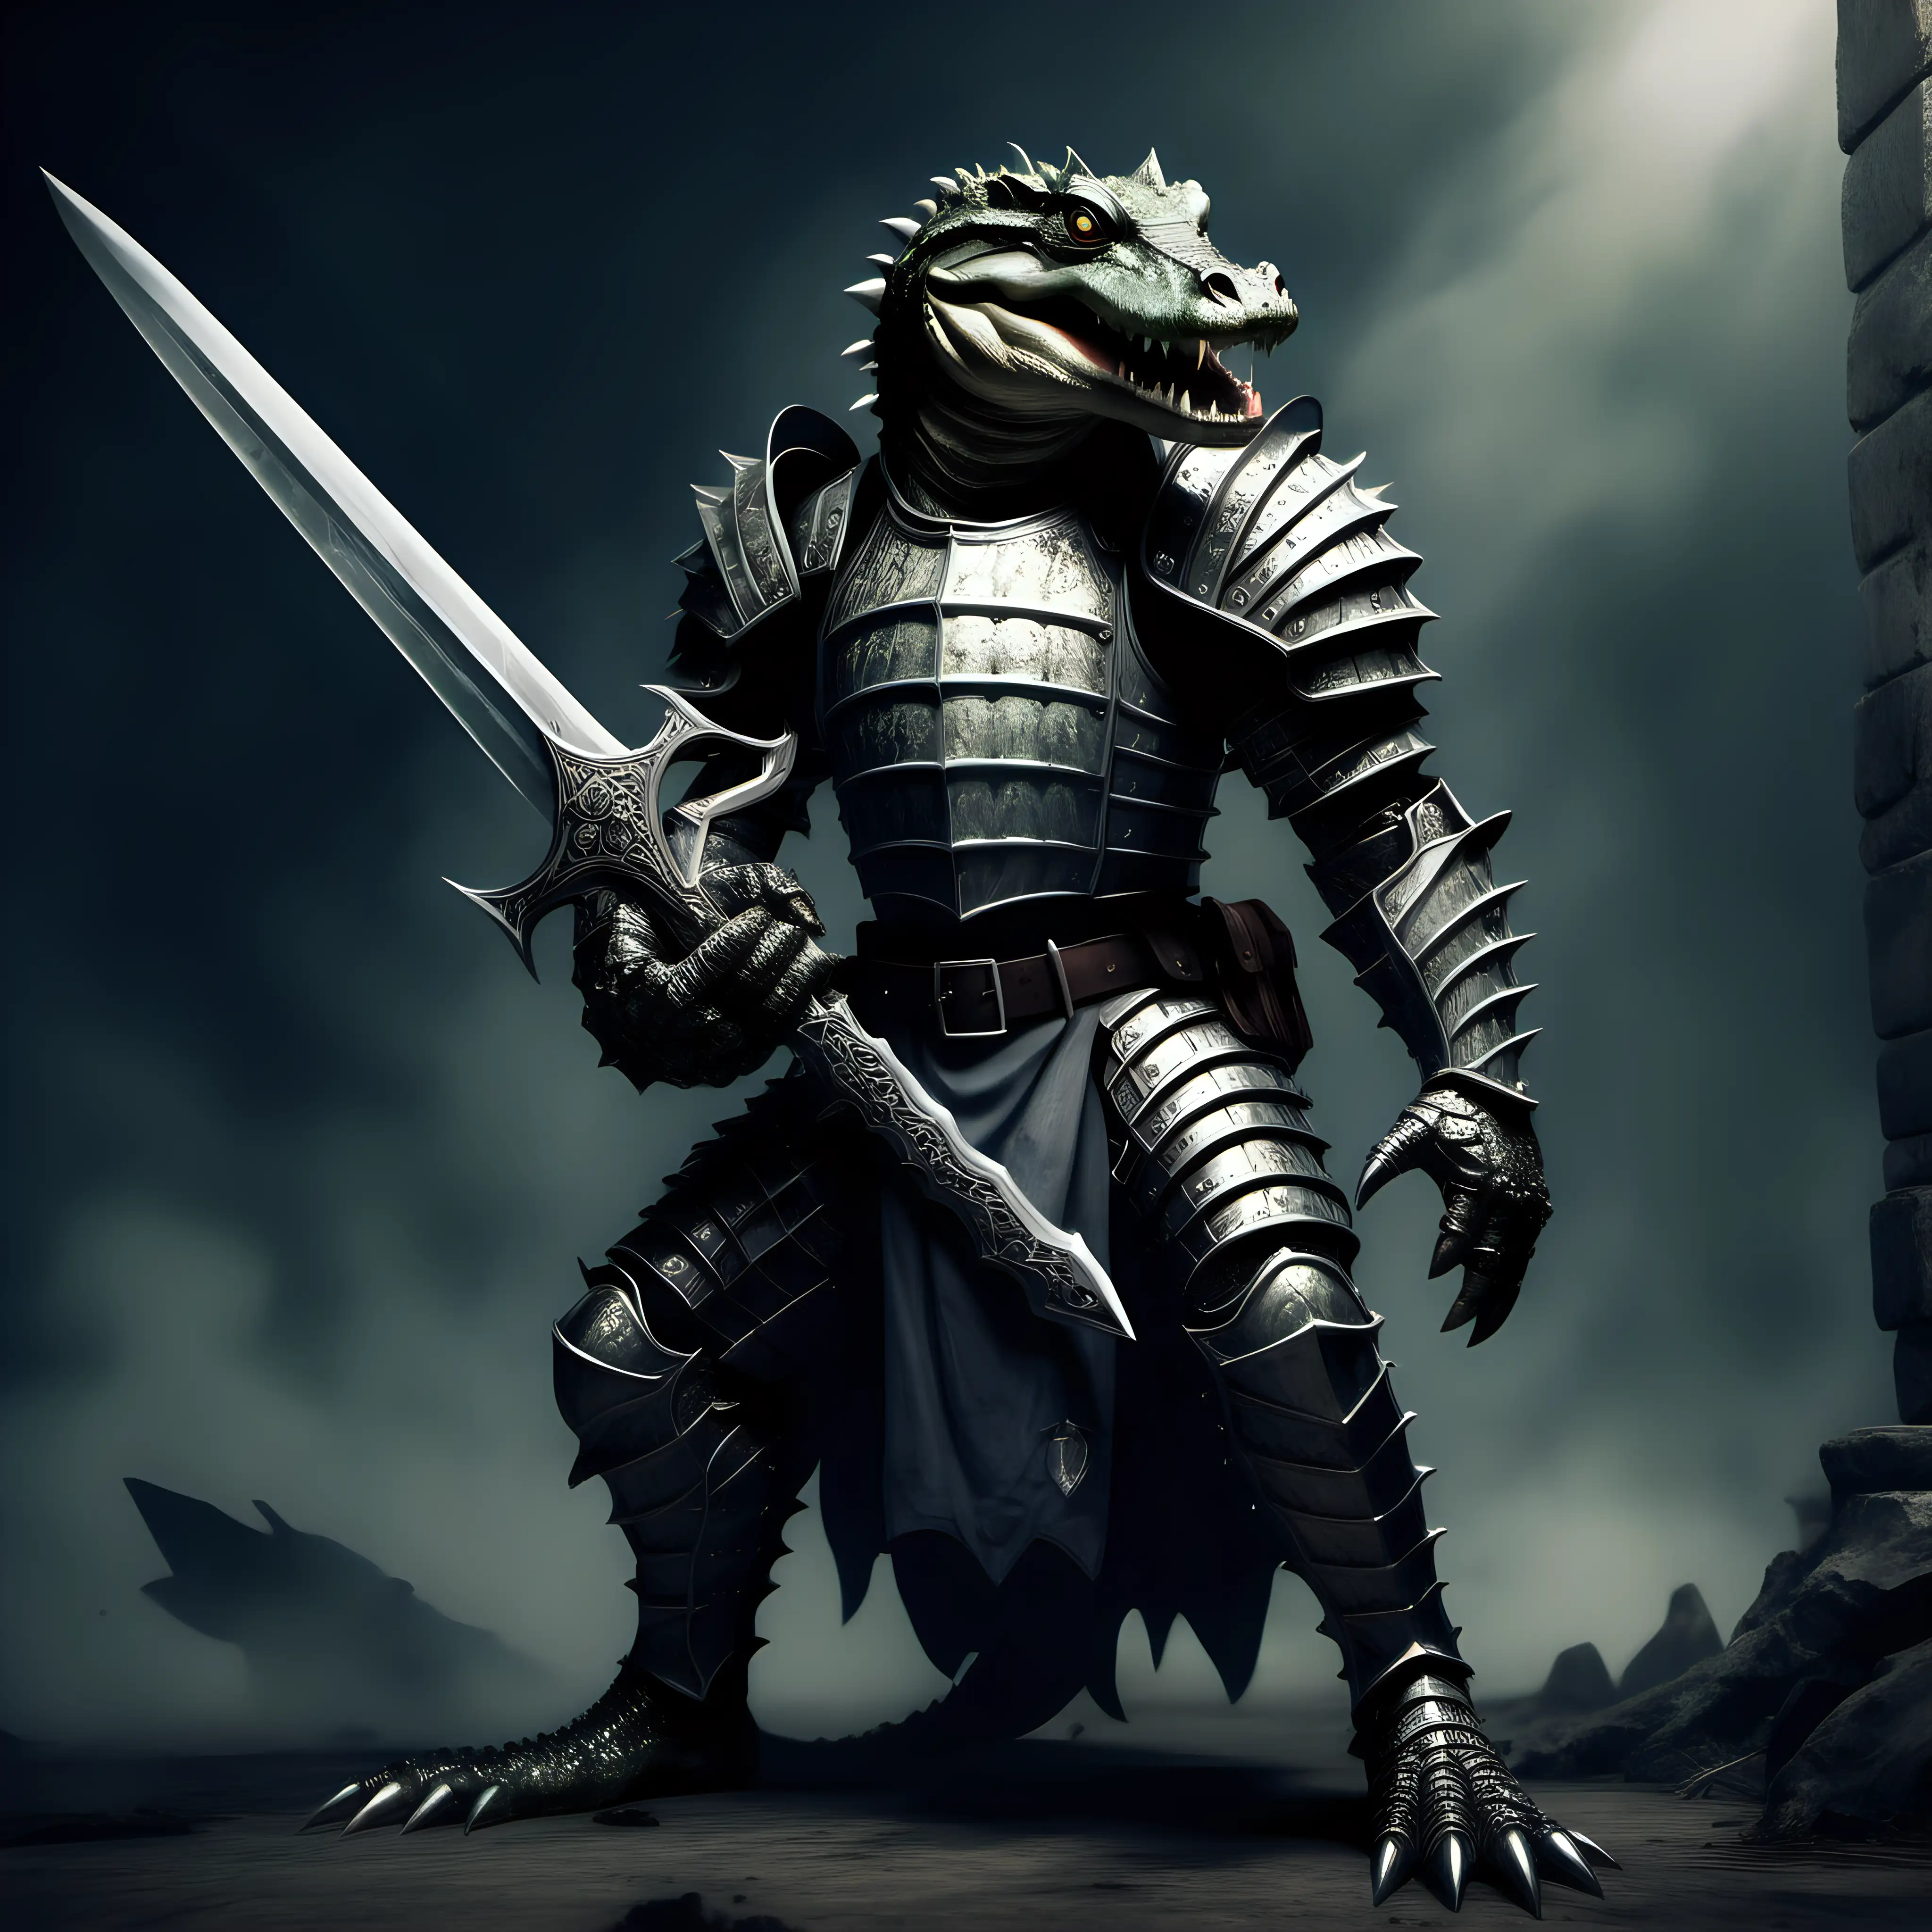 Formidable Caiman Soldier in Gothic Armor with Massive Sword